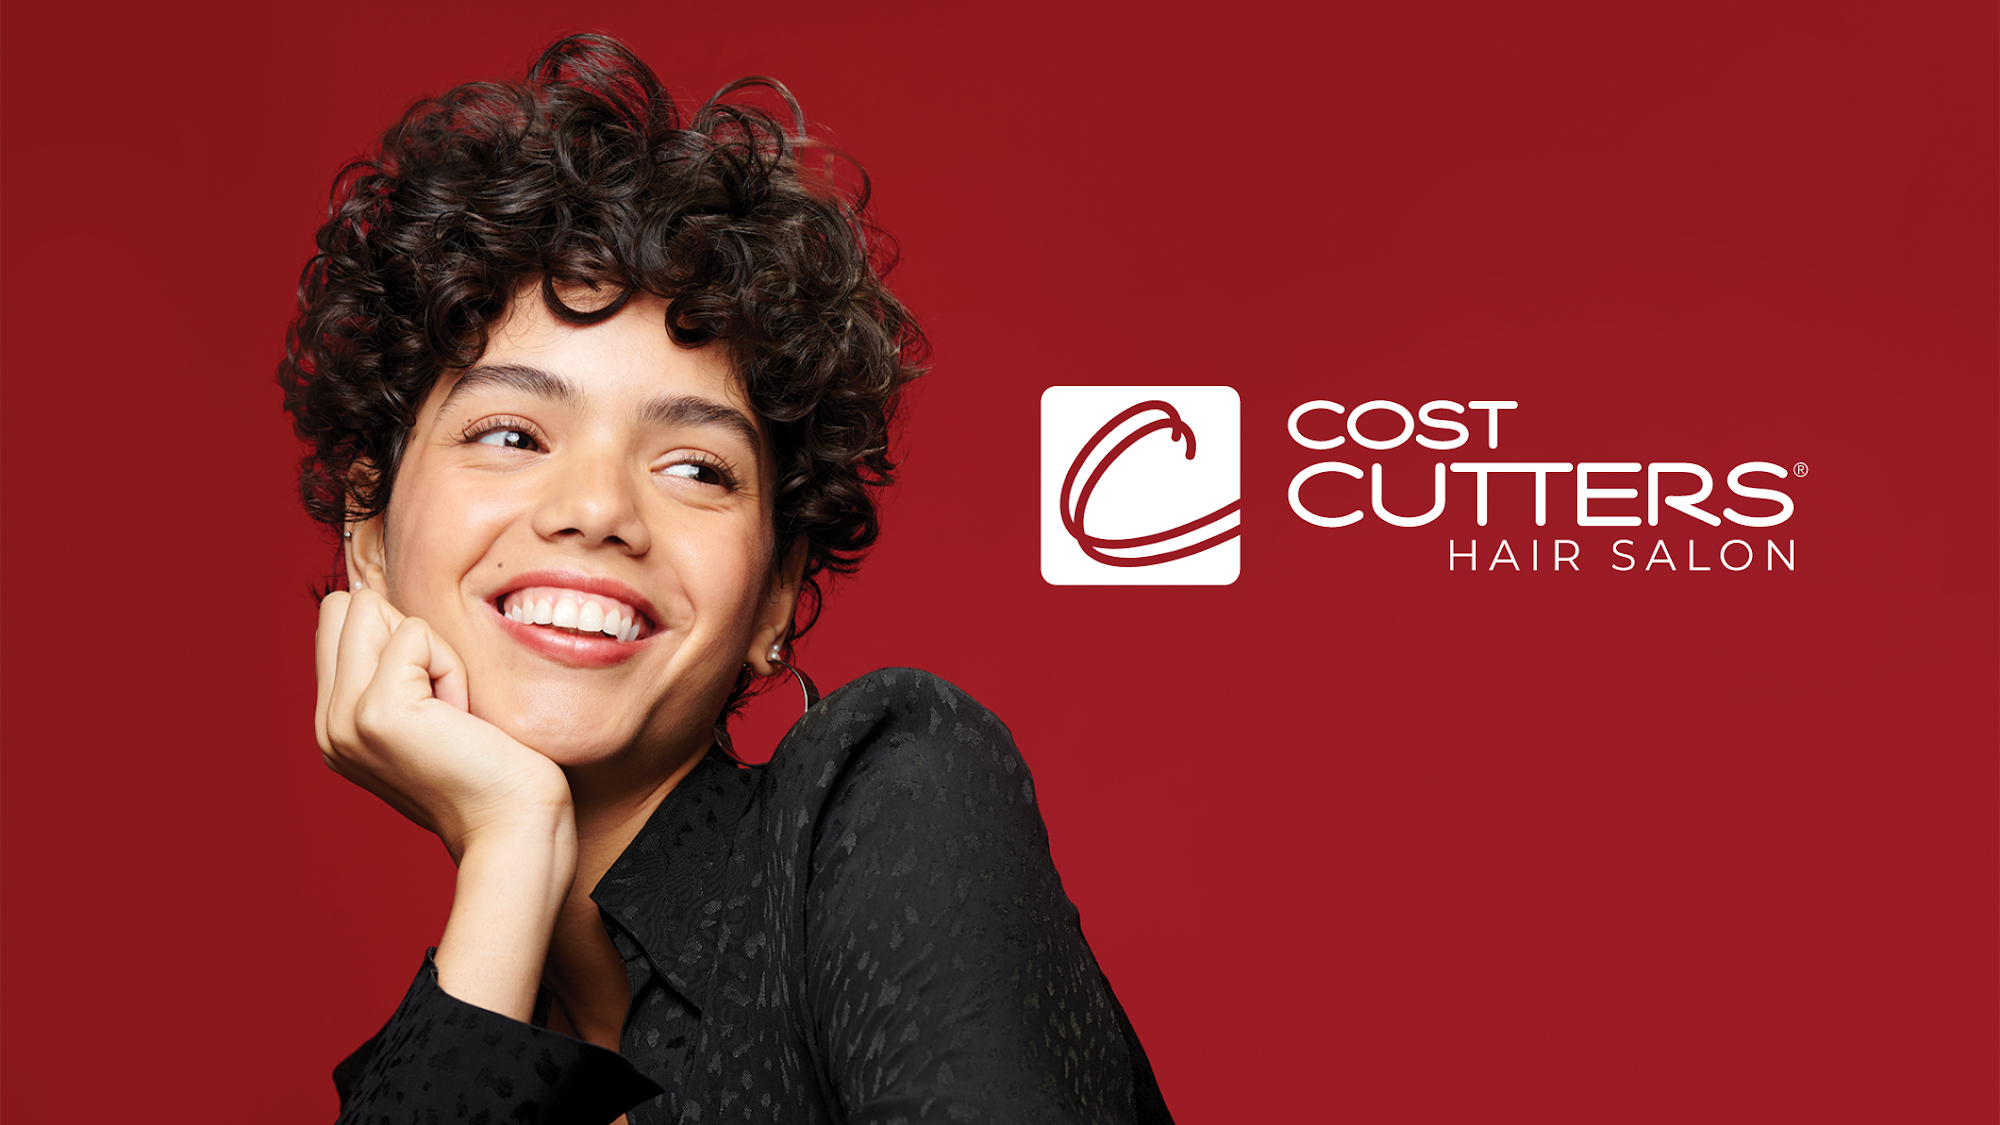 Cost Cutters 616 South Ave, Tallmadge Ohio 44278